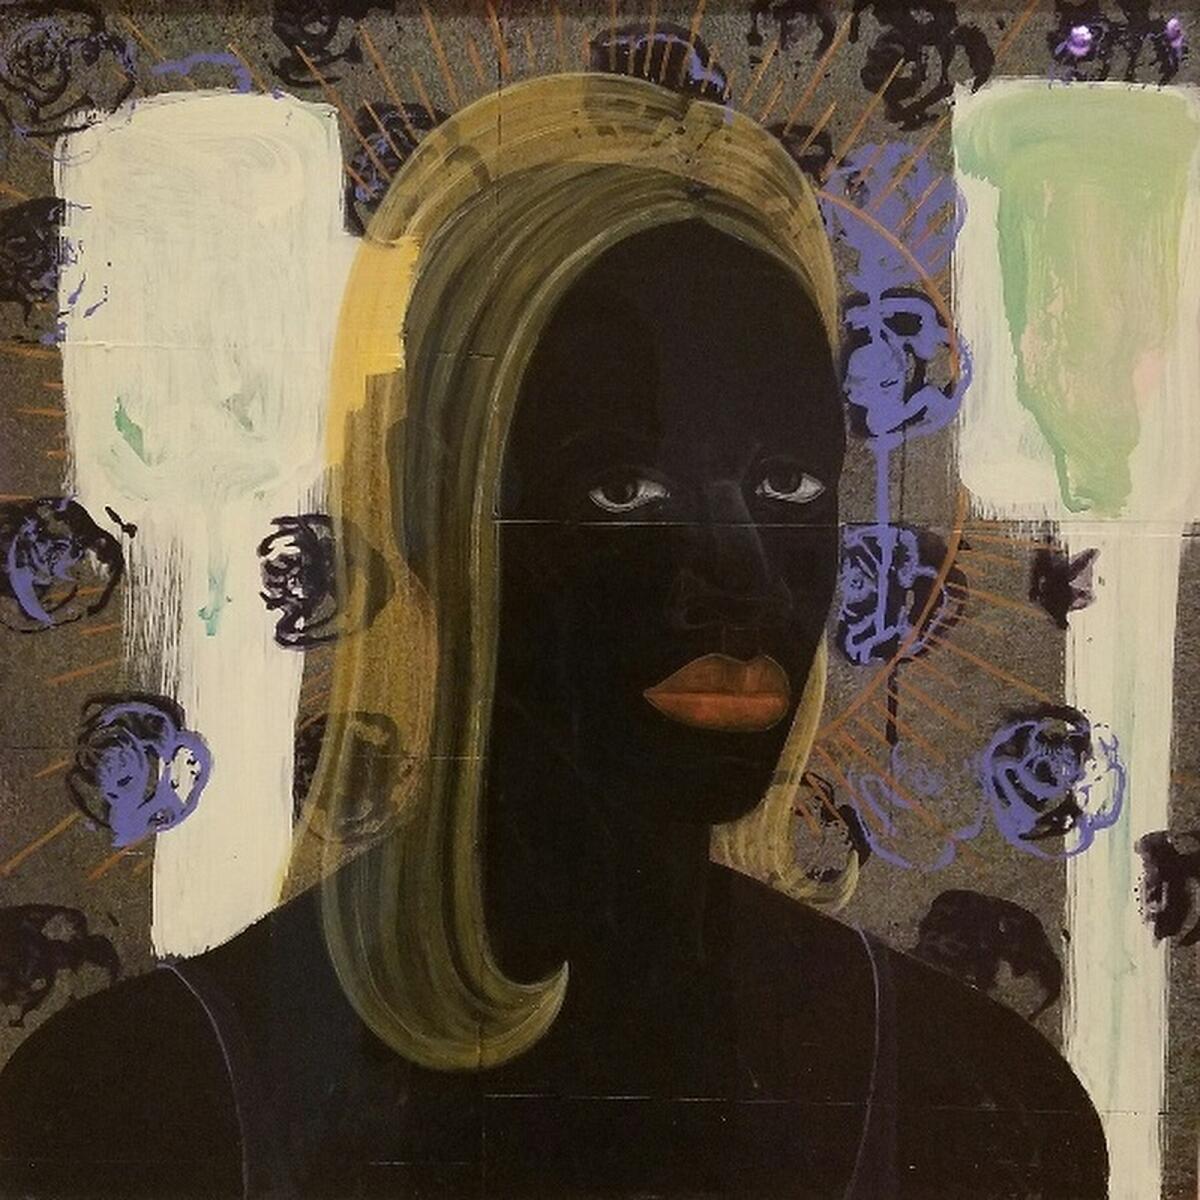 "Self-Portrait of the Artist as a Super Model," 1994, by Kerry James Marshall, at MOCA. (Kerry James Marshal / MOCA)